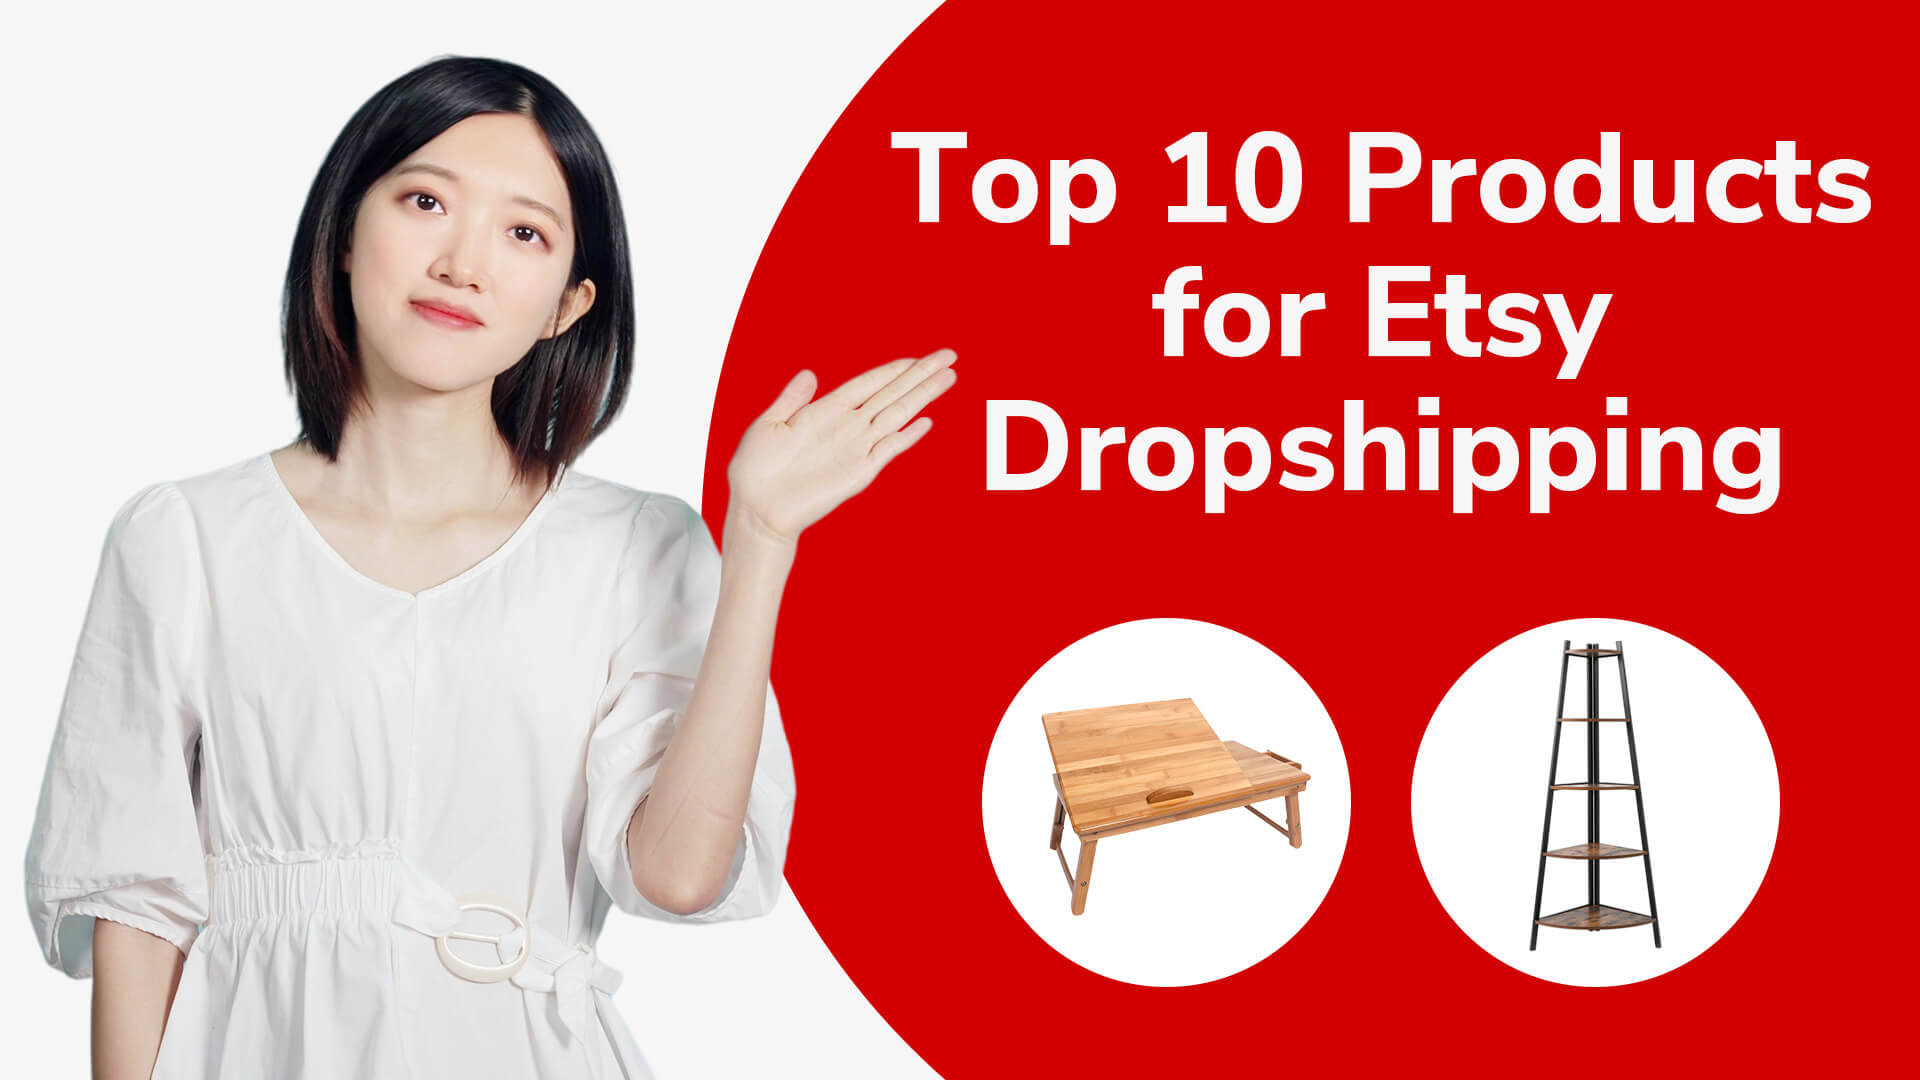 Top 10 Products for Etsy Dropshipping (2022)